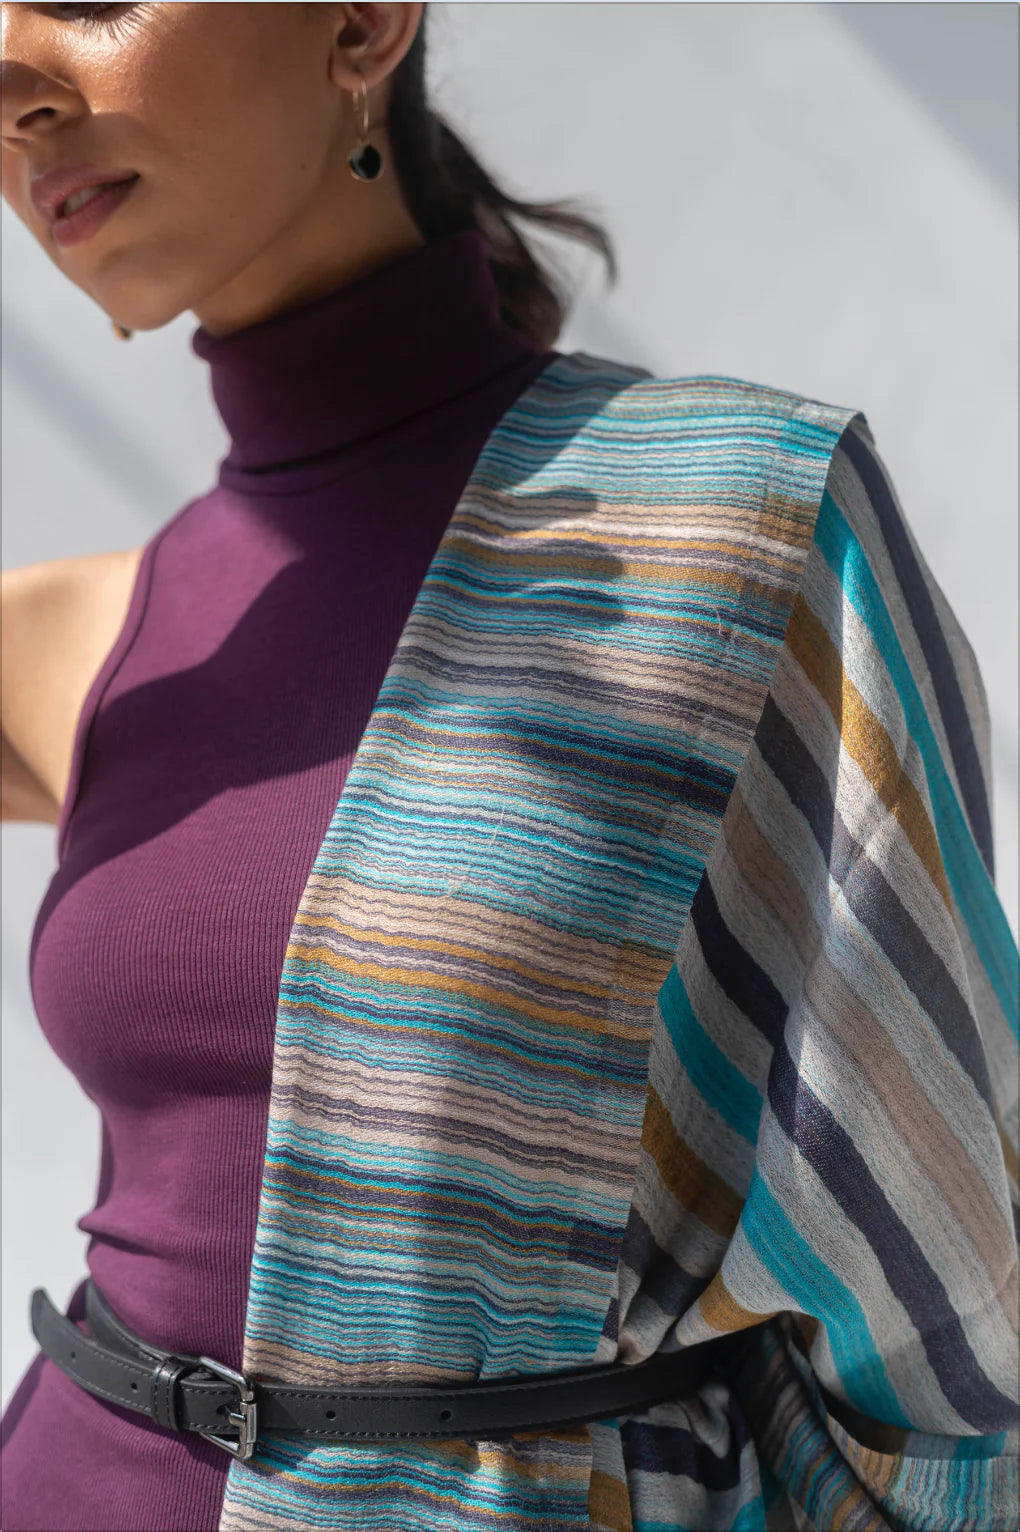 Handcrafted Soft Cashmere Stole - Double-Sided, 105cm x 210cm | Sirli Handwoven Soft Fine Cashmere Stole - Multi Color